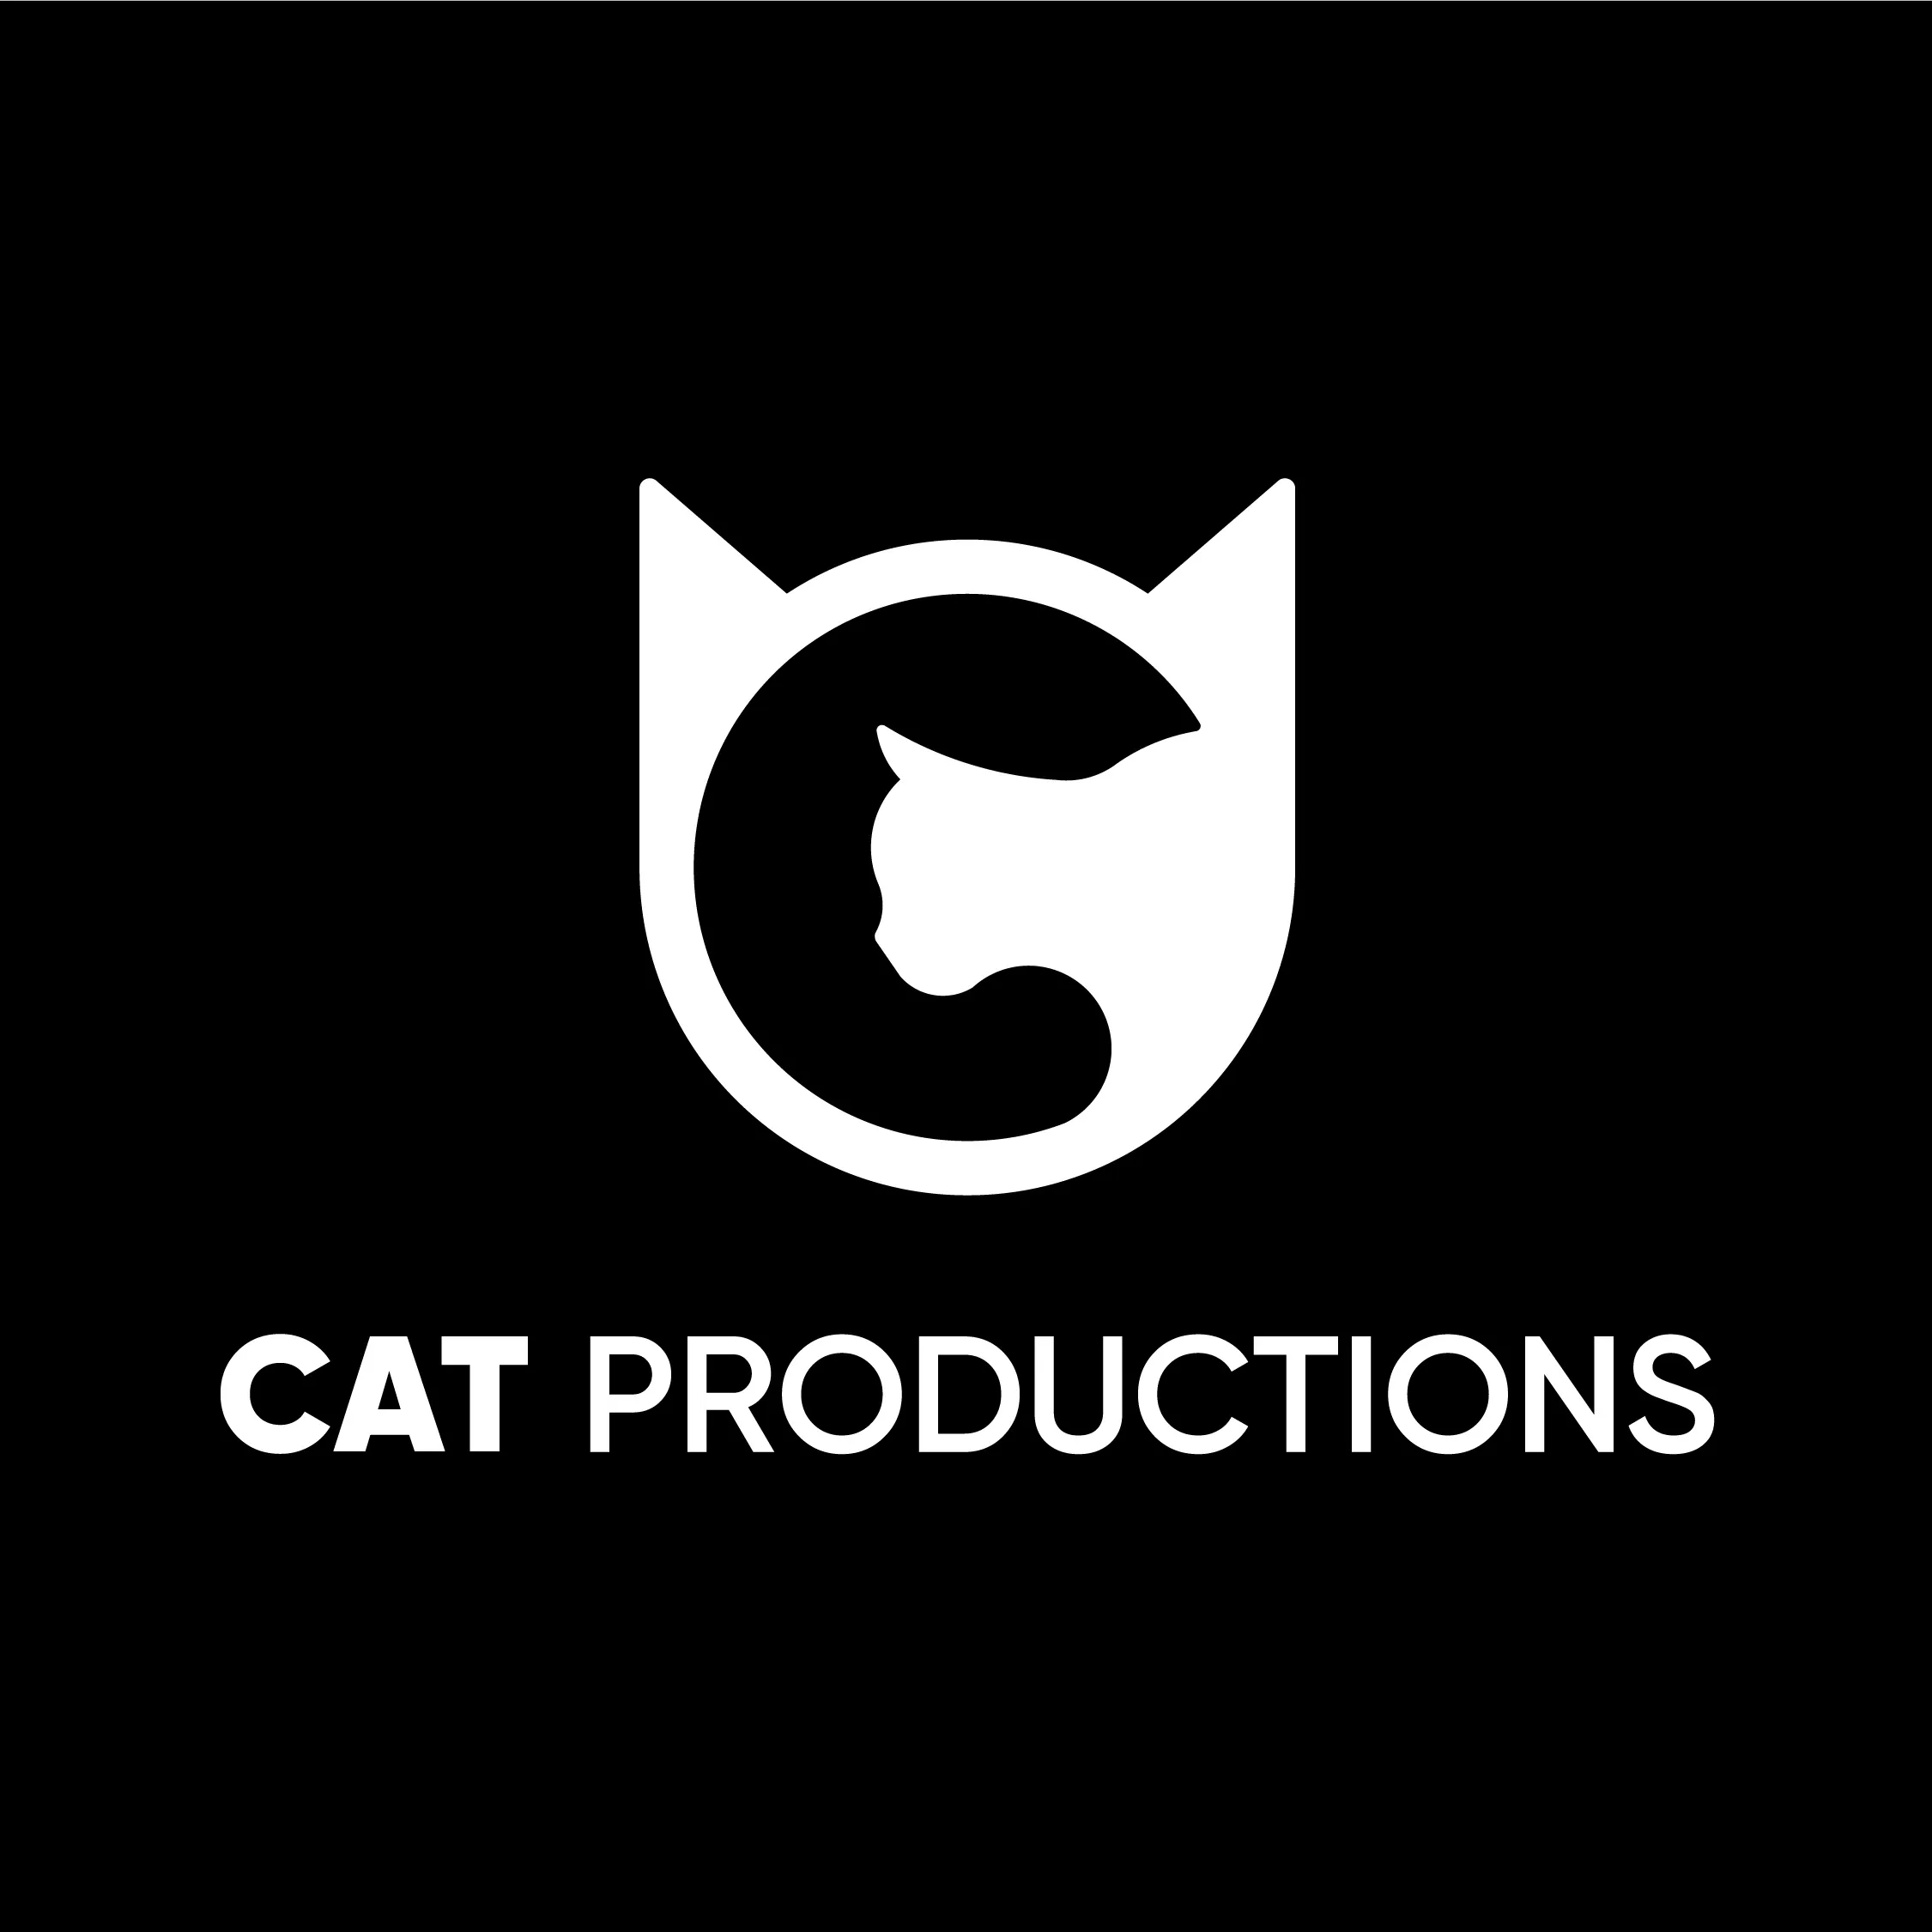 Cat Productions Company Profile, information, investors, valuation ...